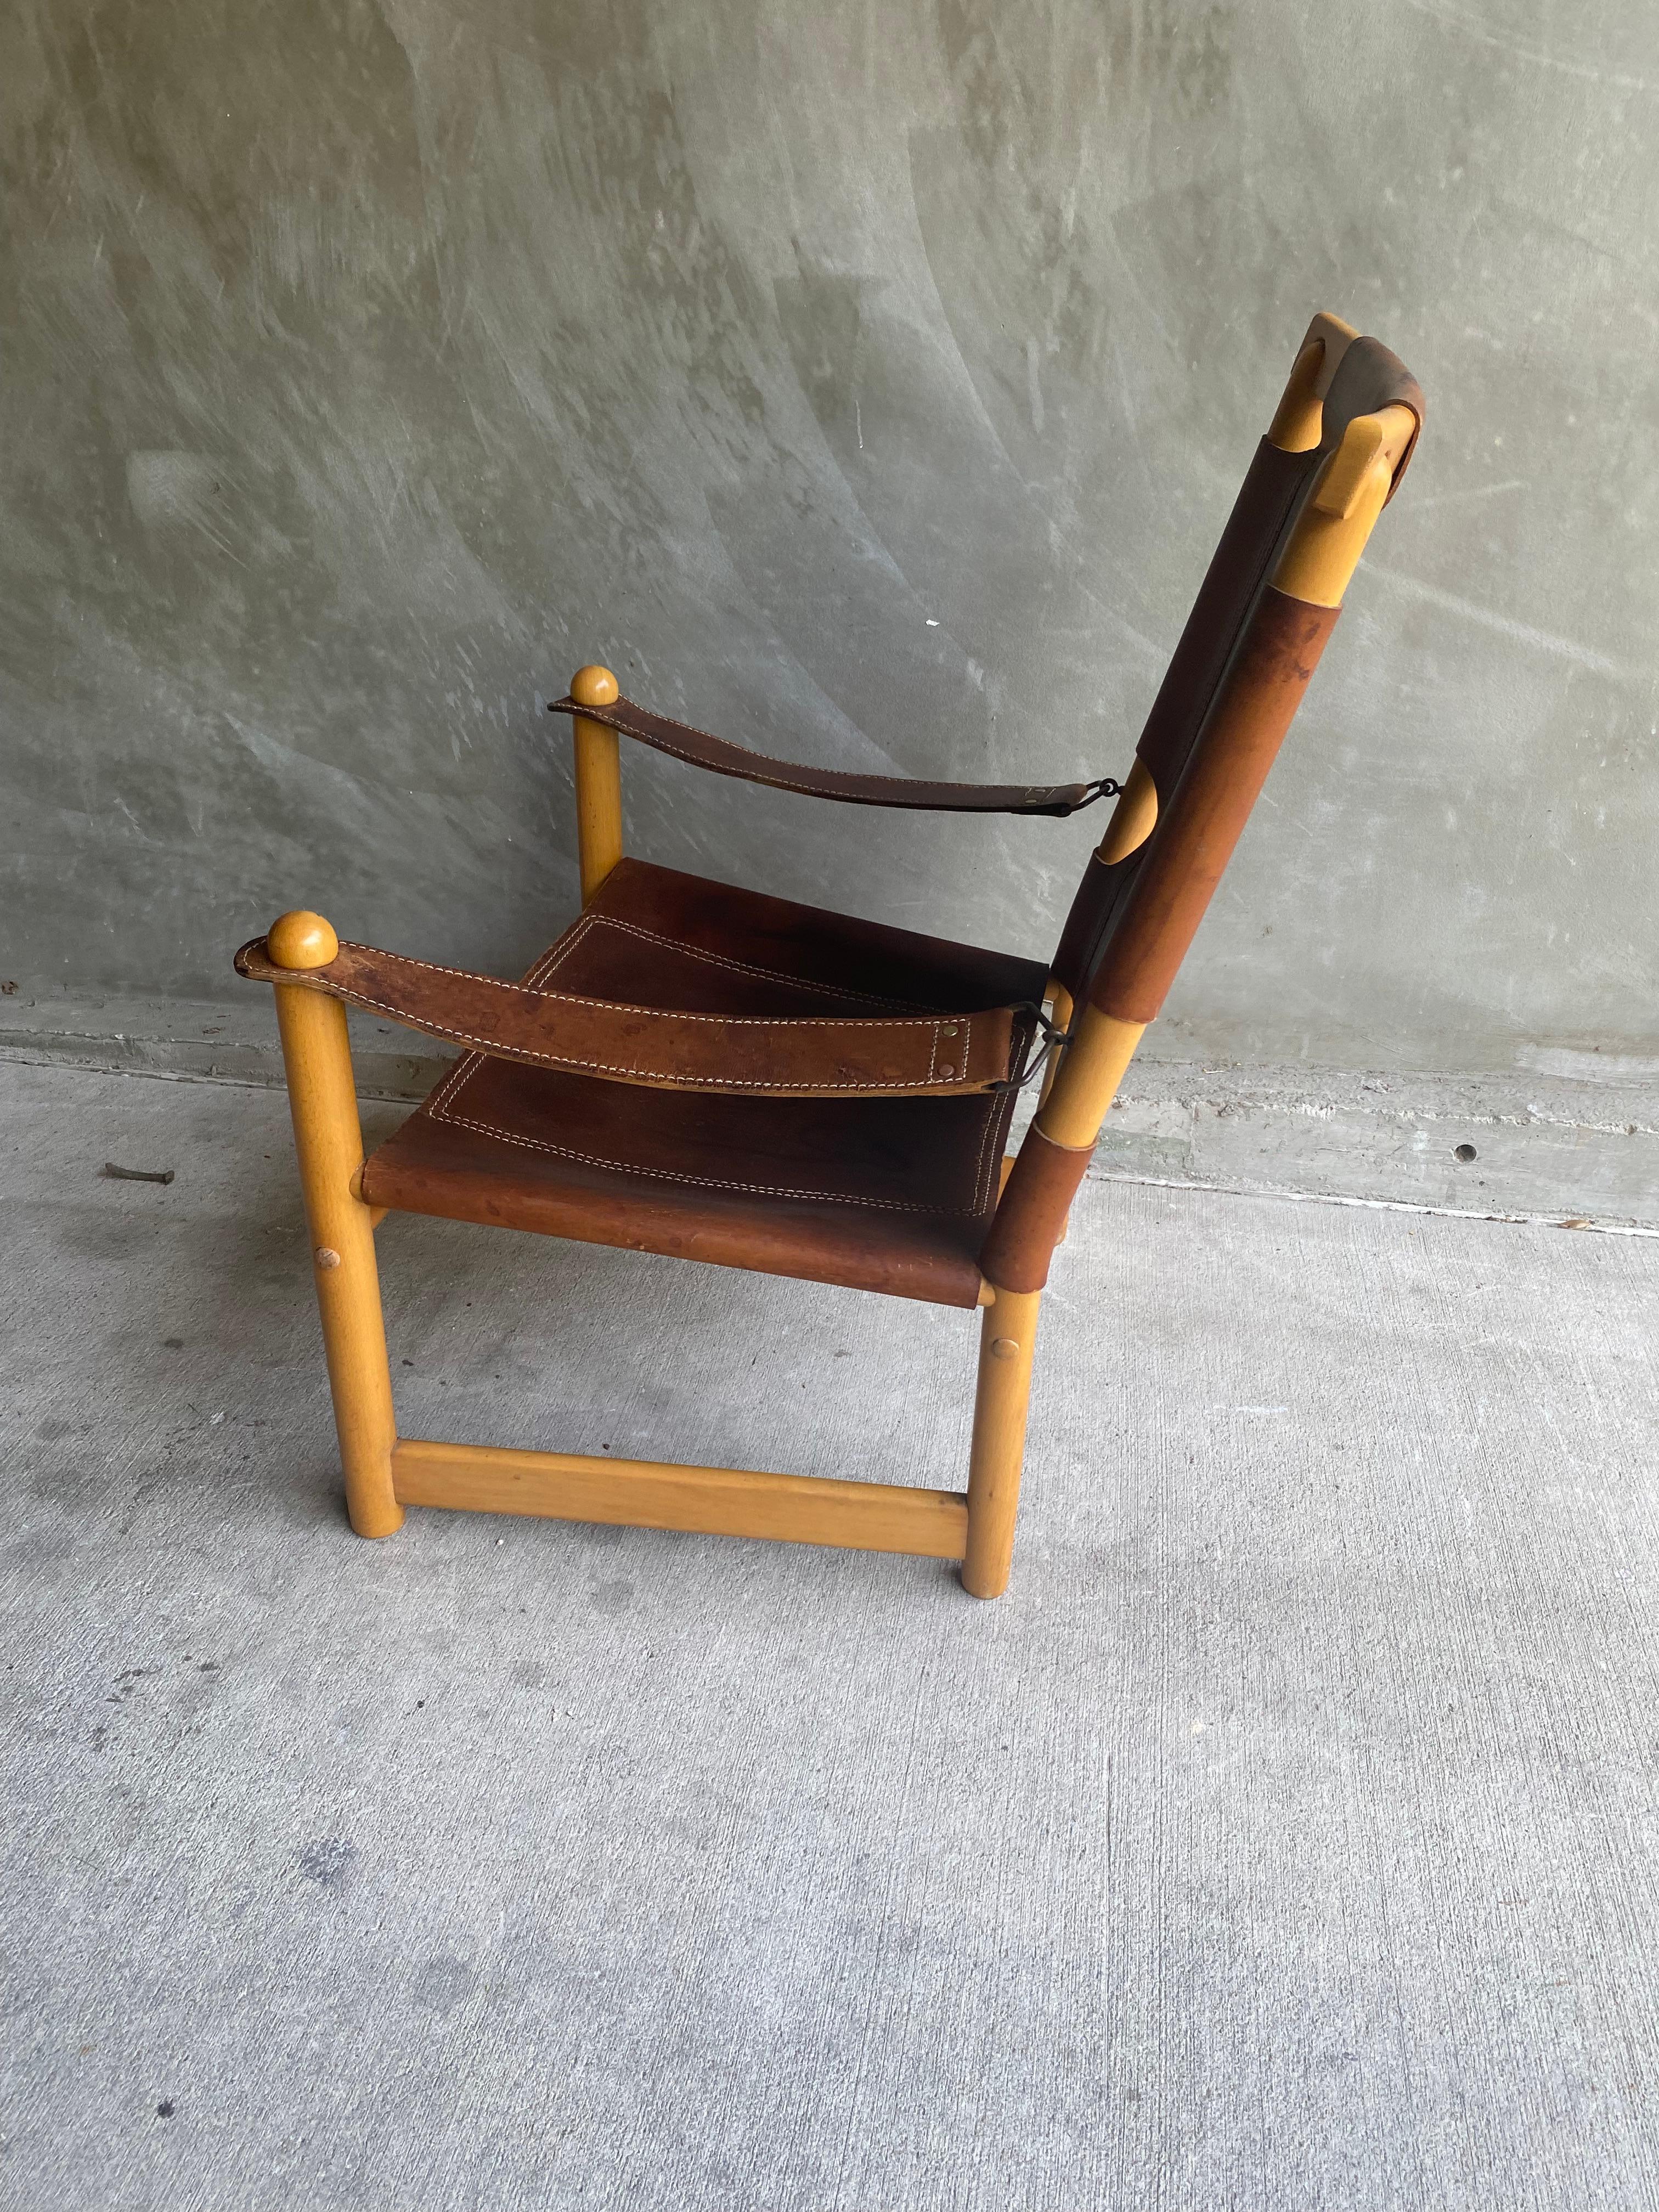 Mid-20th Century Italian Leather Sling Chair, 1960's For Sale